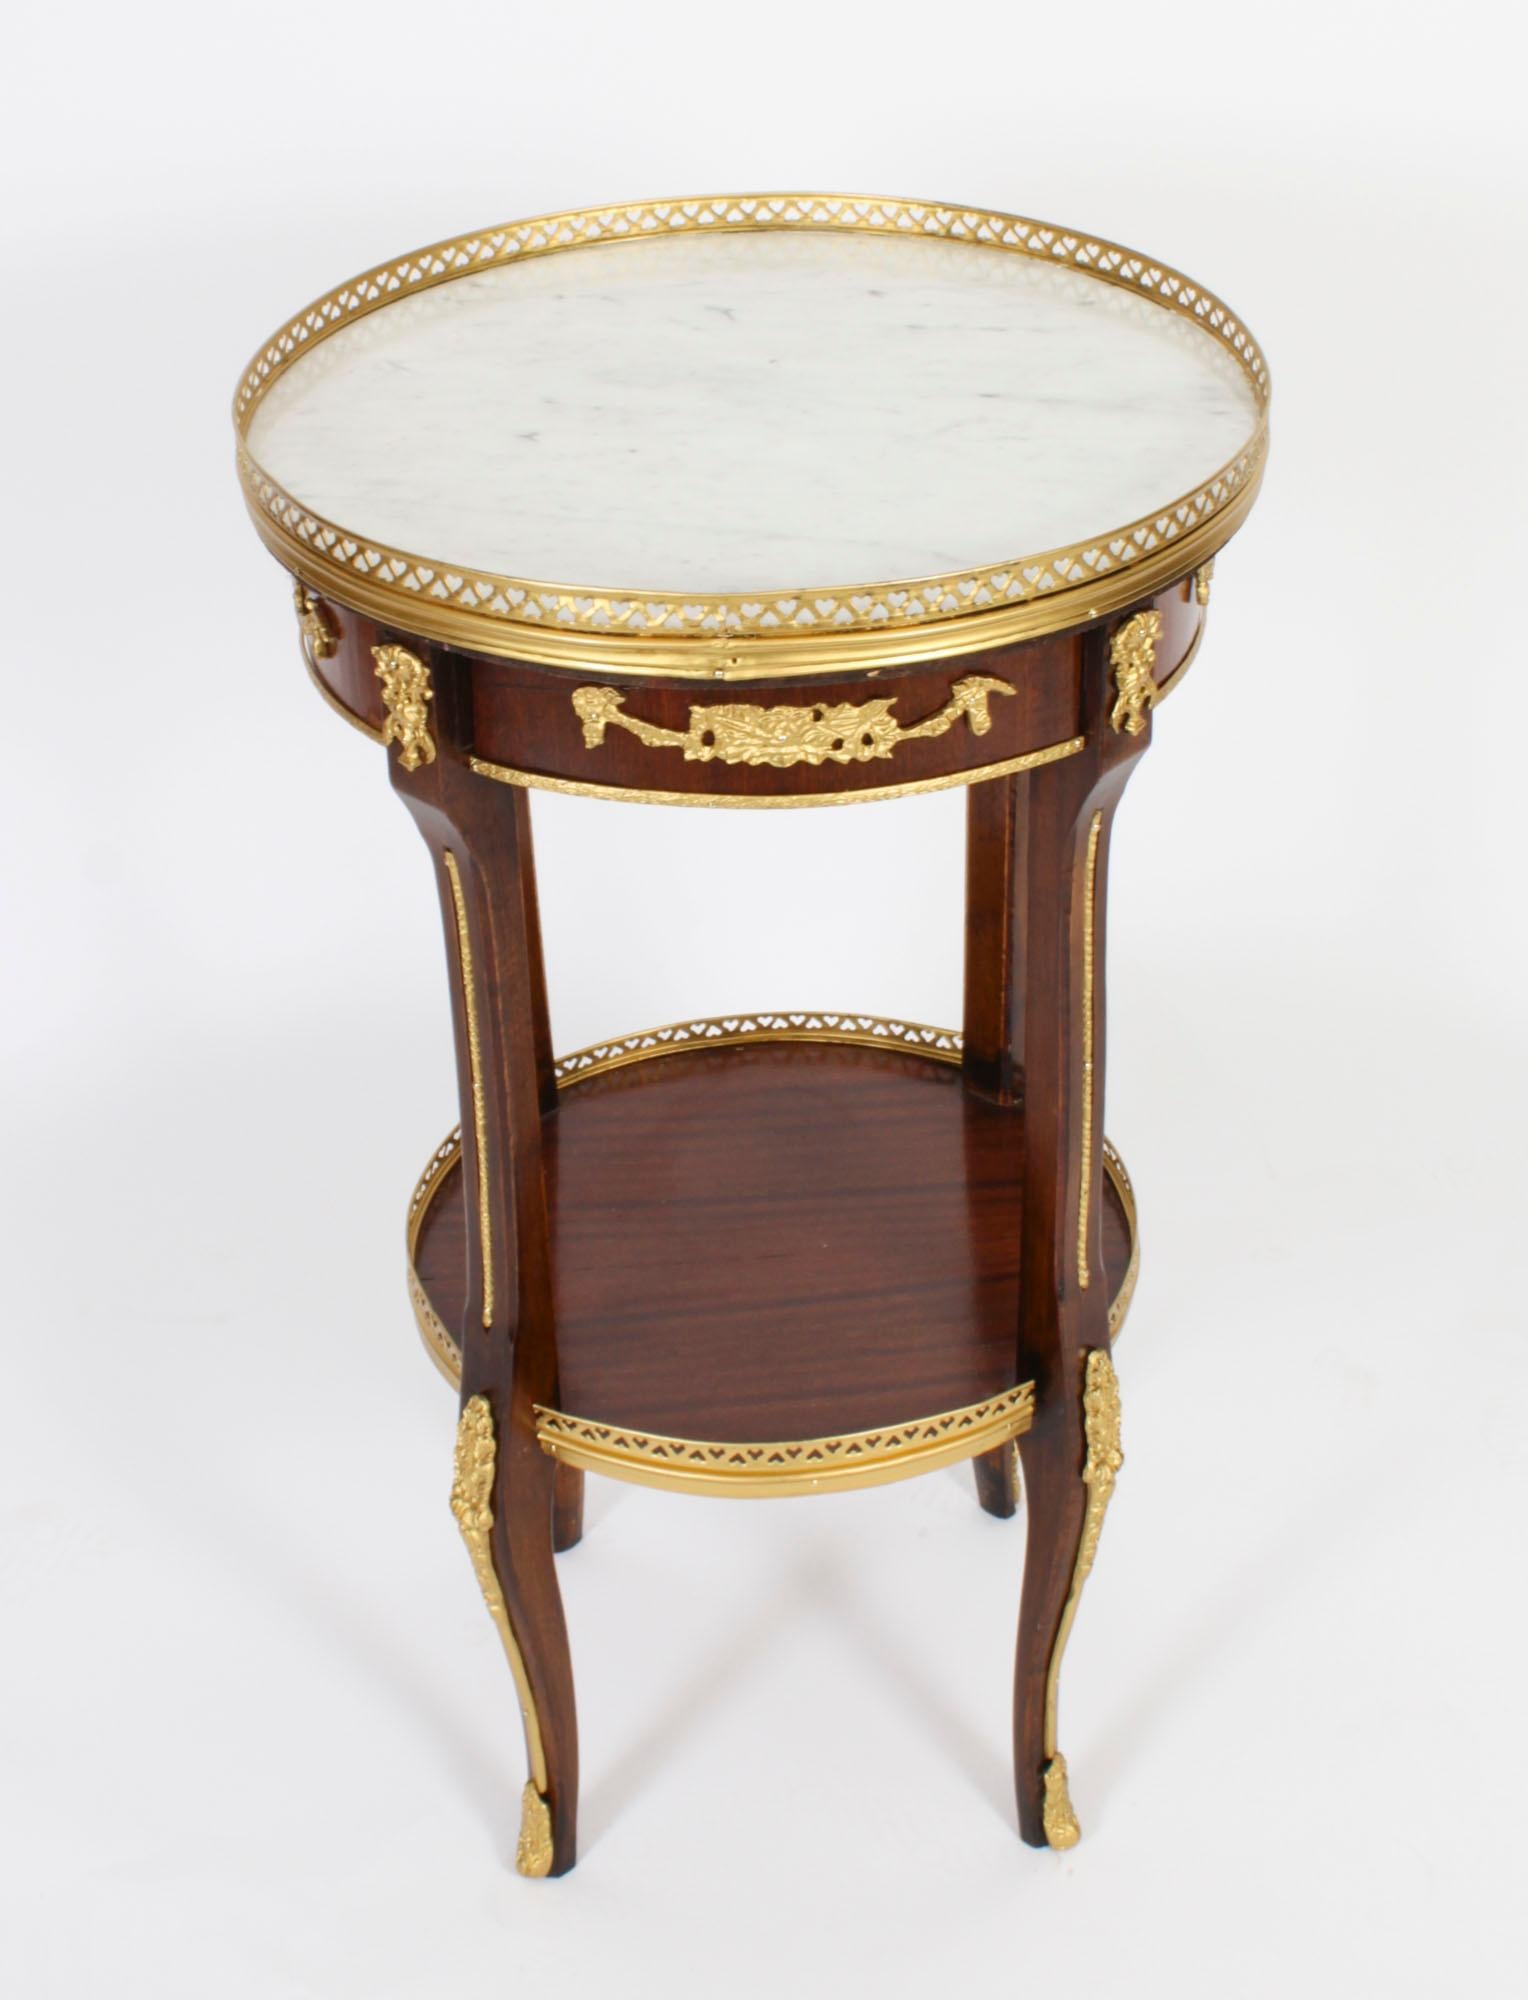 This is a beautiful antique French Empire Revival circular occasional table with ornate ormolu decoration and a beautiful inset white 